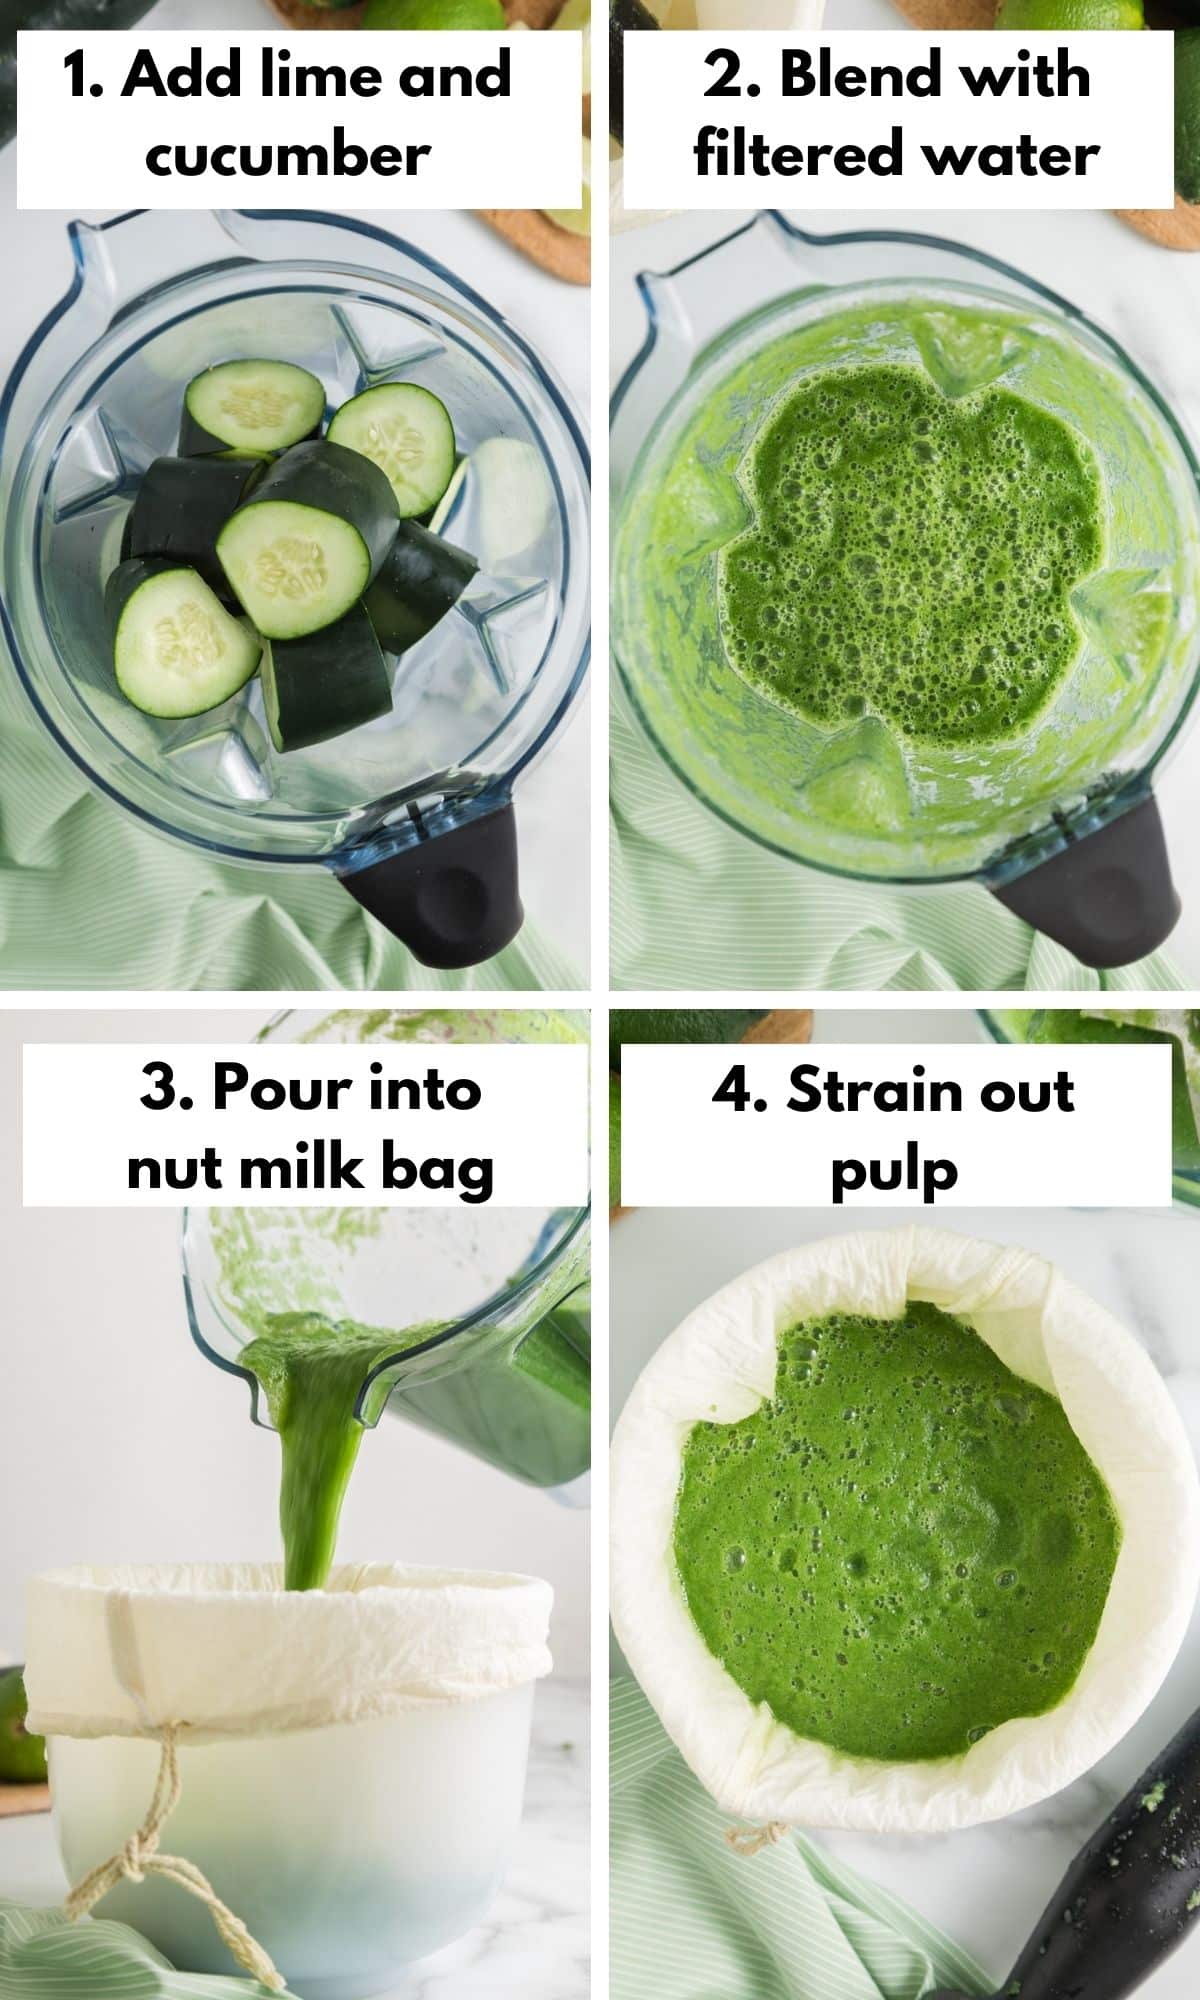 How to Make Juice in a Blender